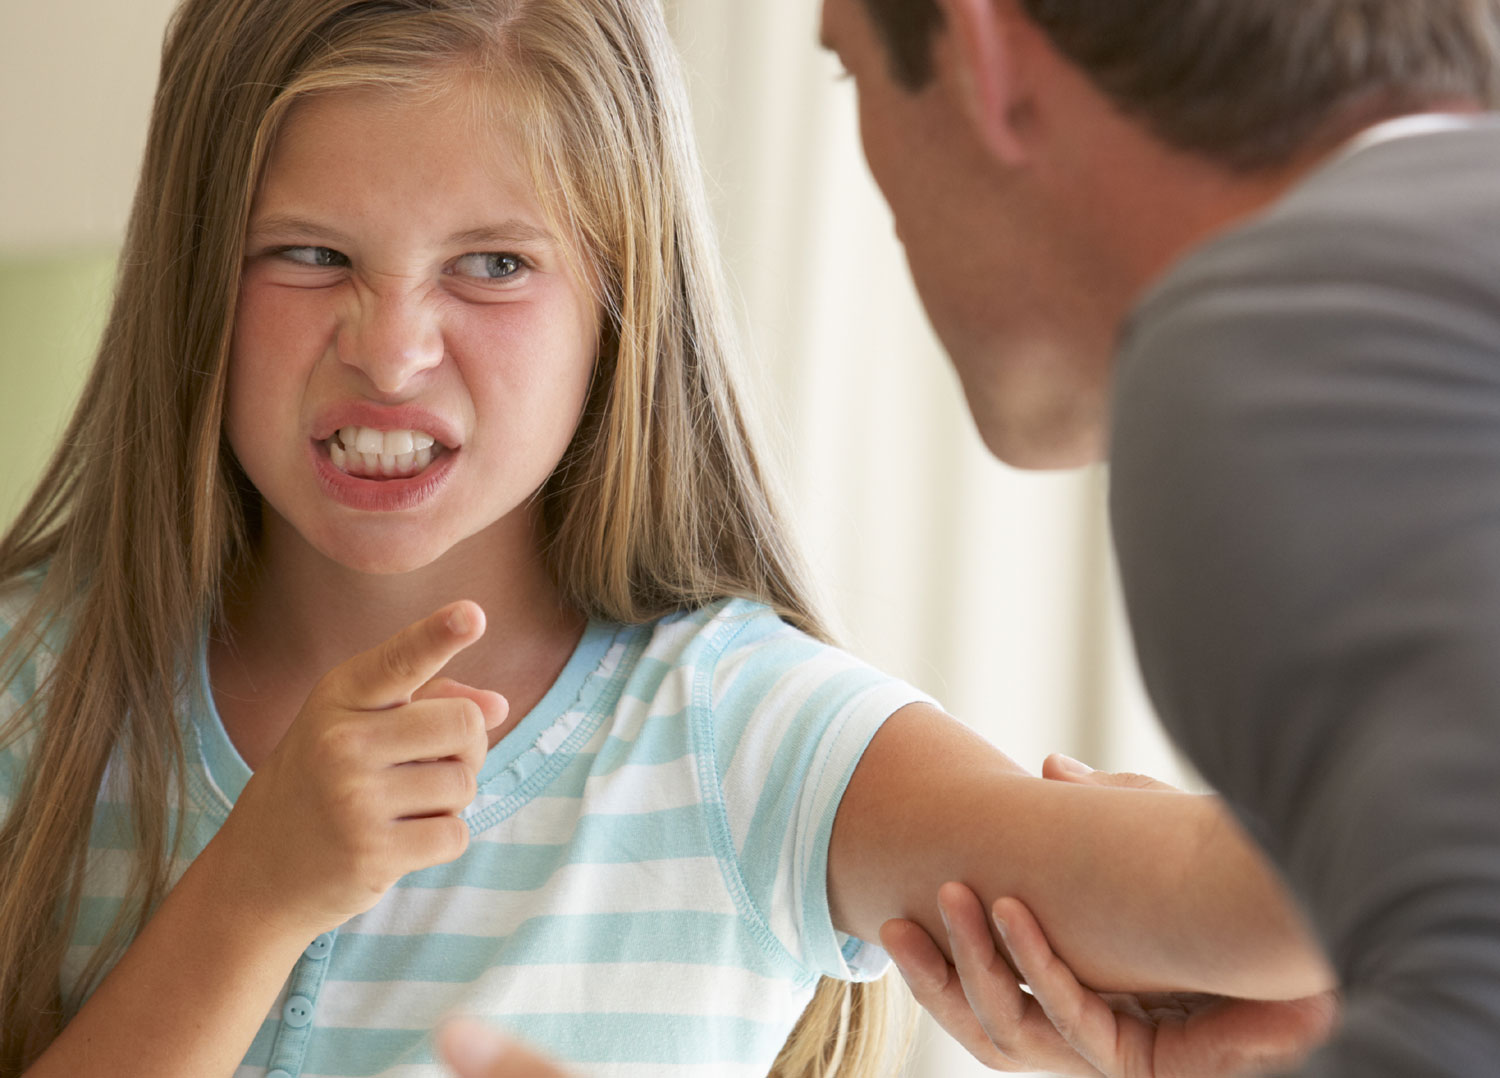 Dads teen daughter. Ругающий папочка. Angry father. Fondling daughter. Father scolds children.